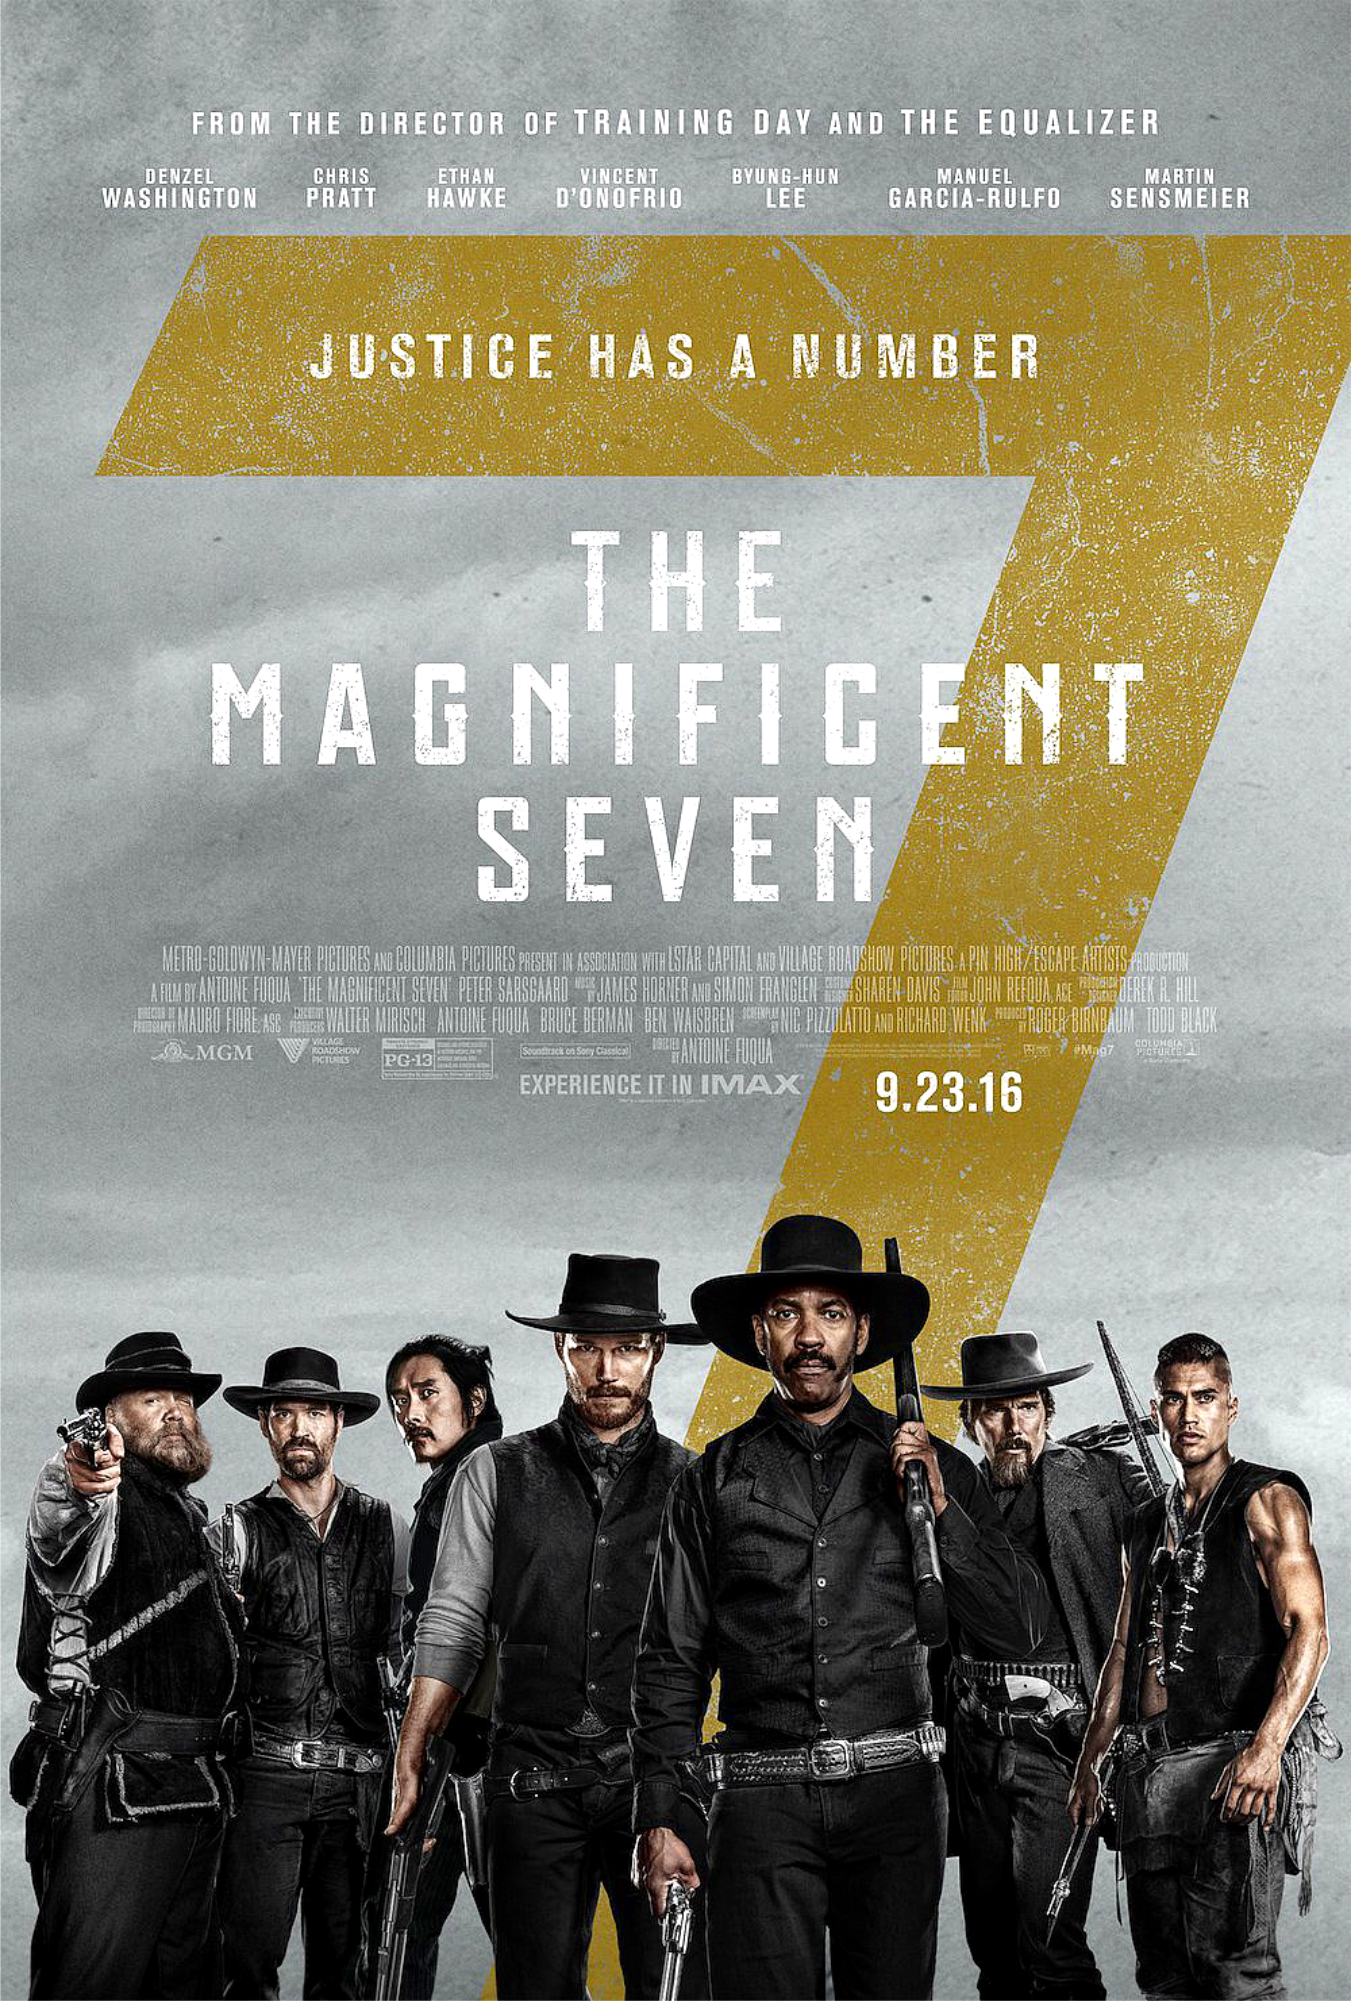 THE MAGNIFICENT 7 2016 - poster 2